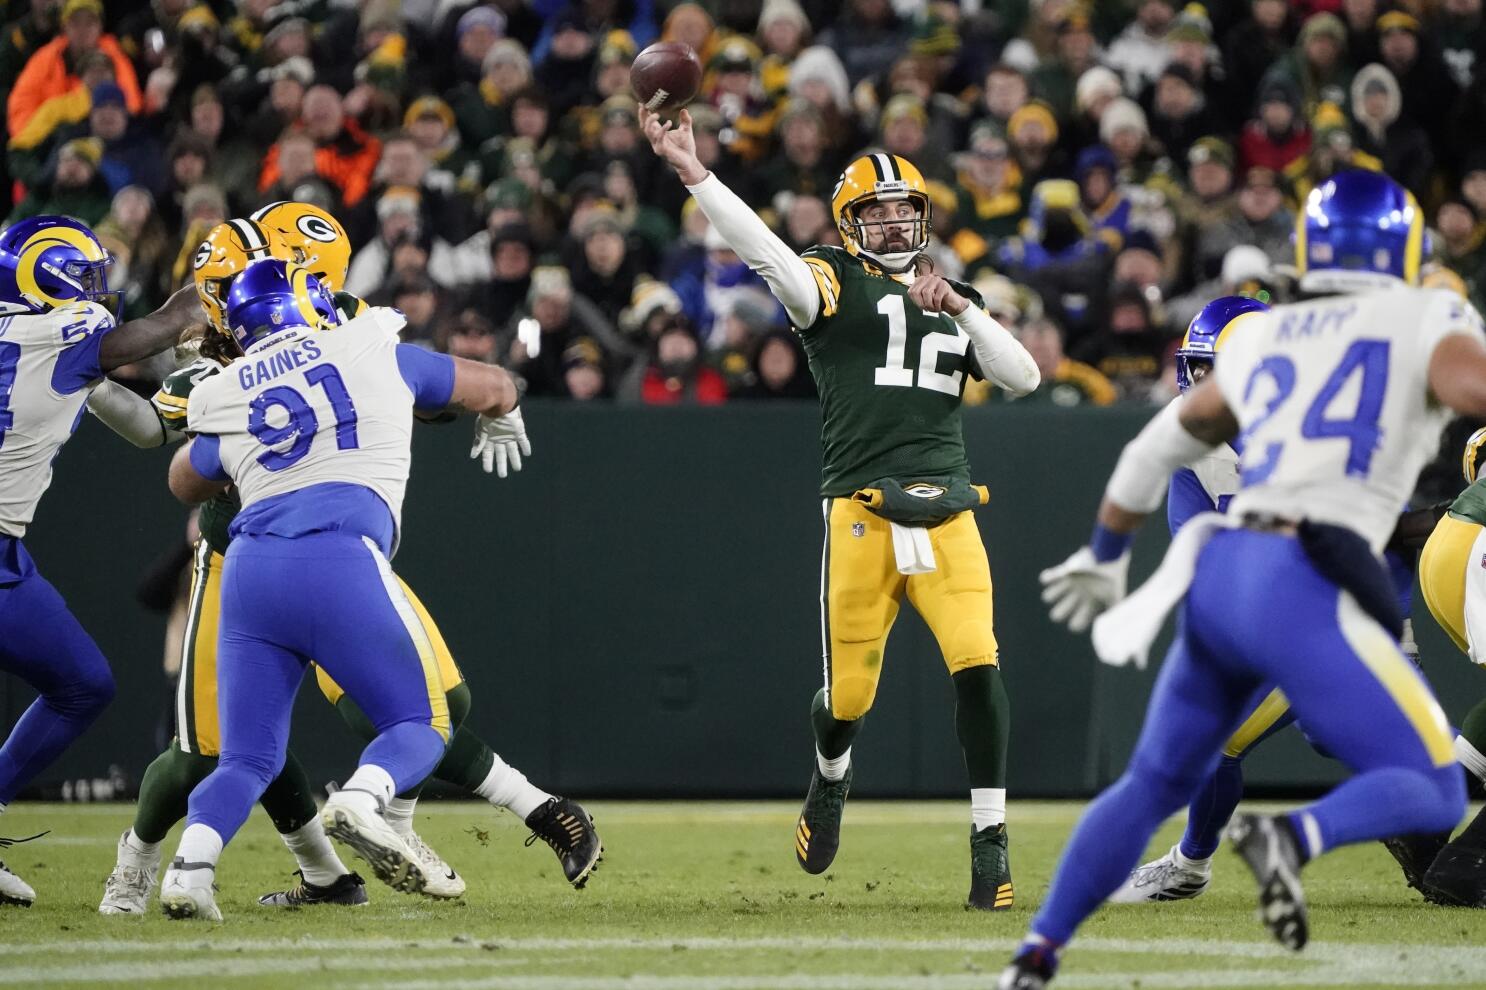 The Packers are searching for fixes to their injury-riddled